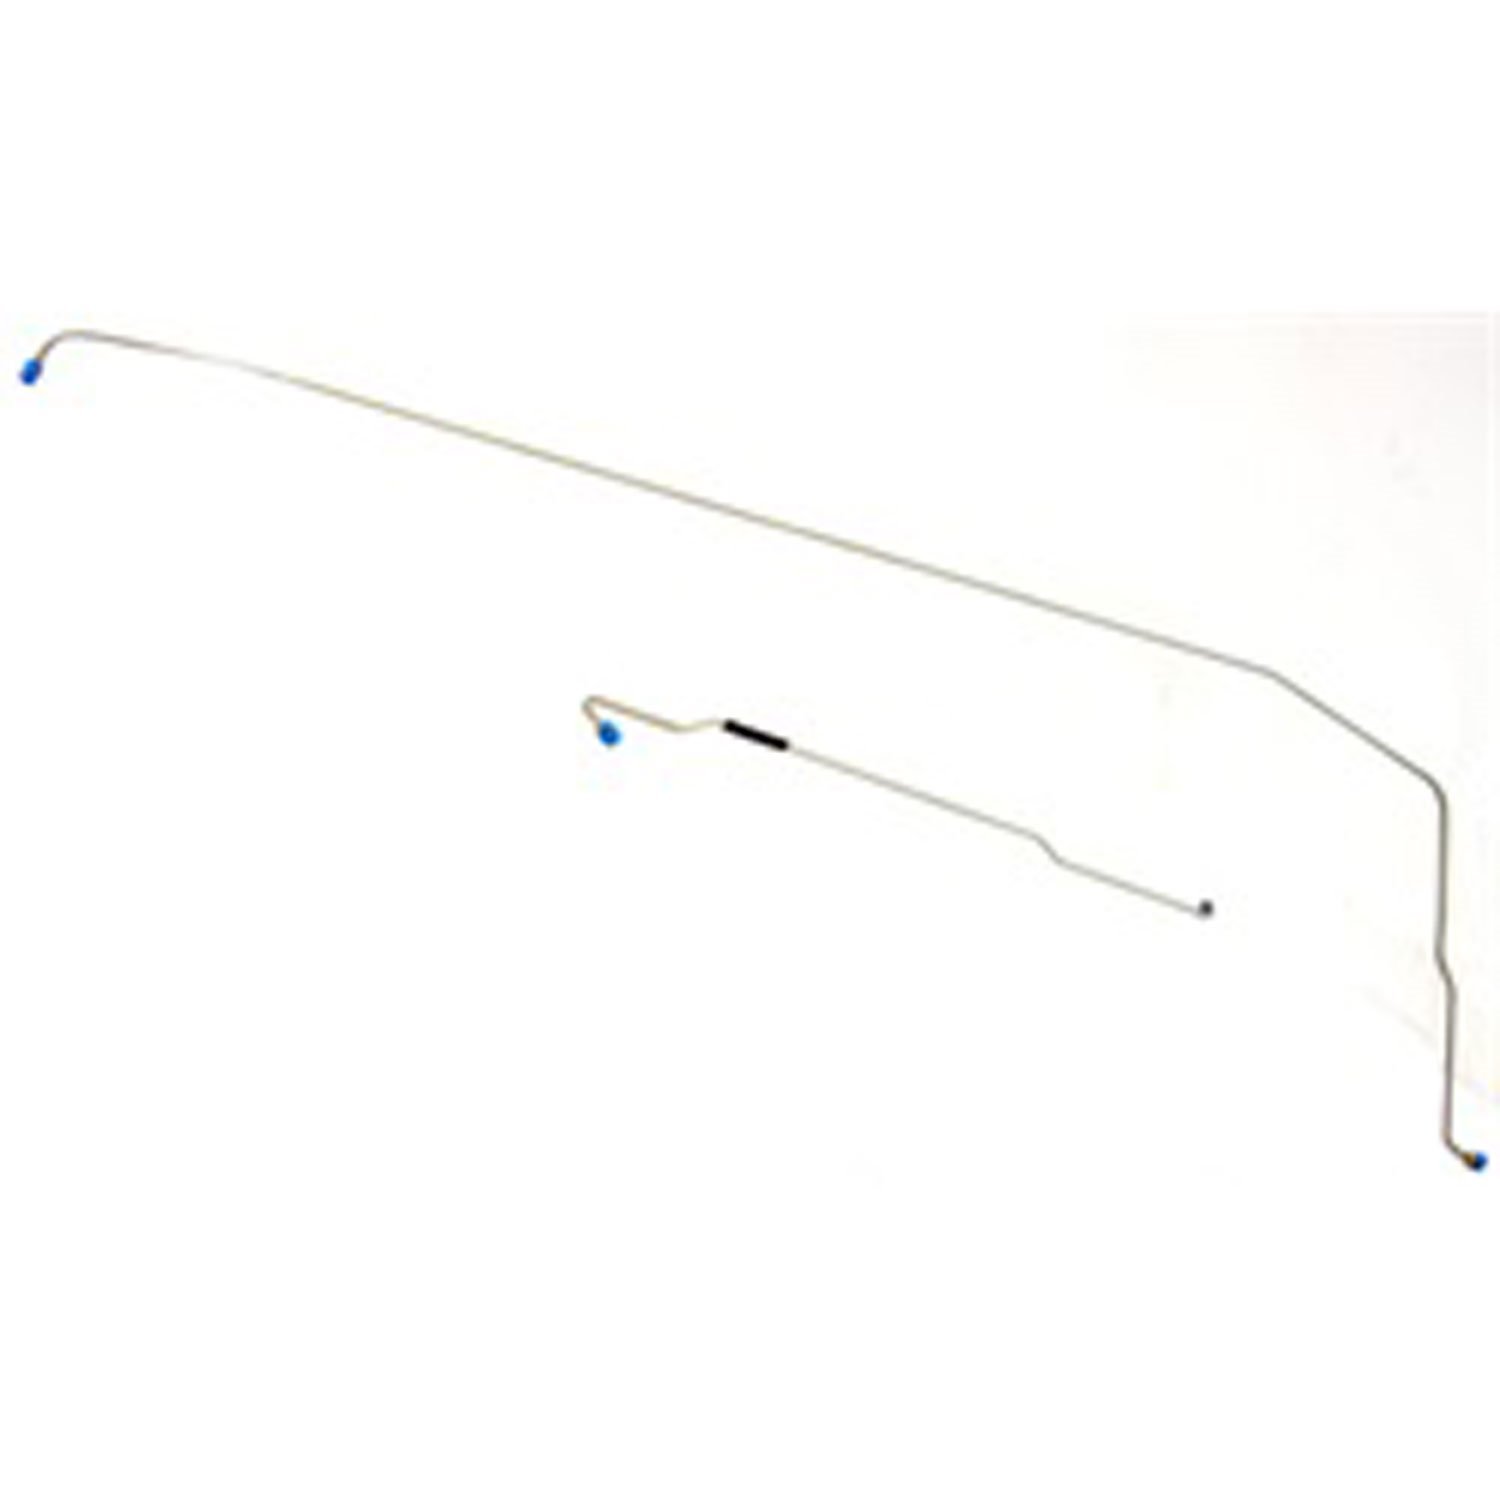 This frame brake line set from Omix-ADA fits 1956-1964 Jeep CJ-3Bs.